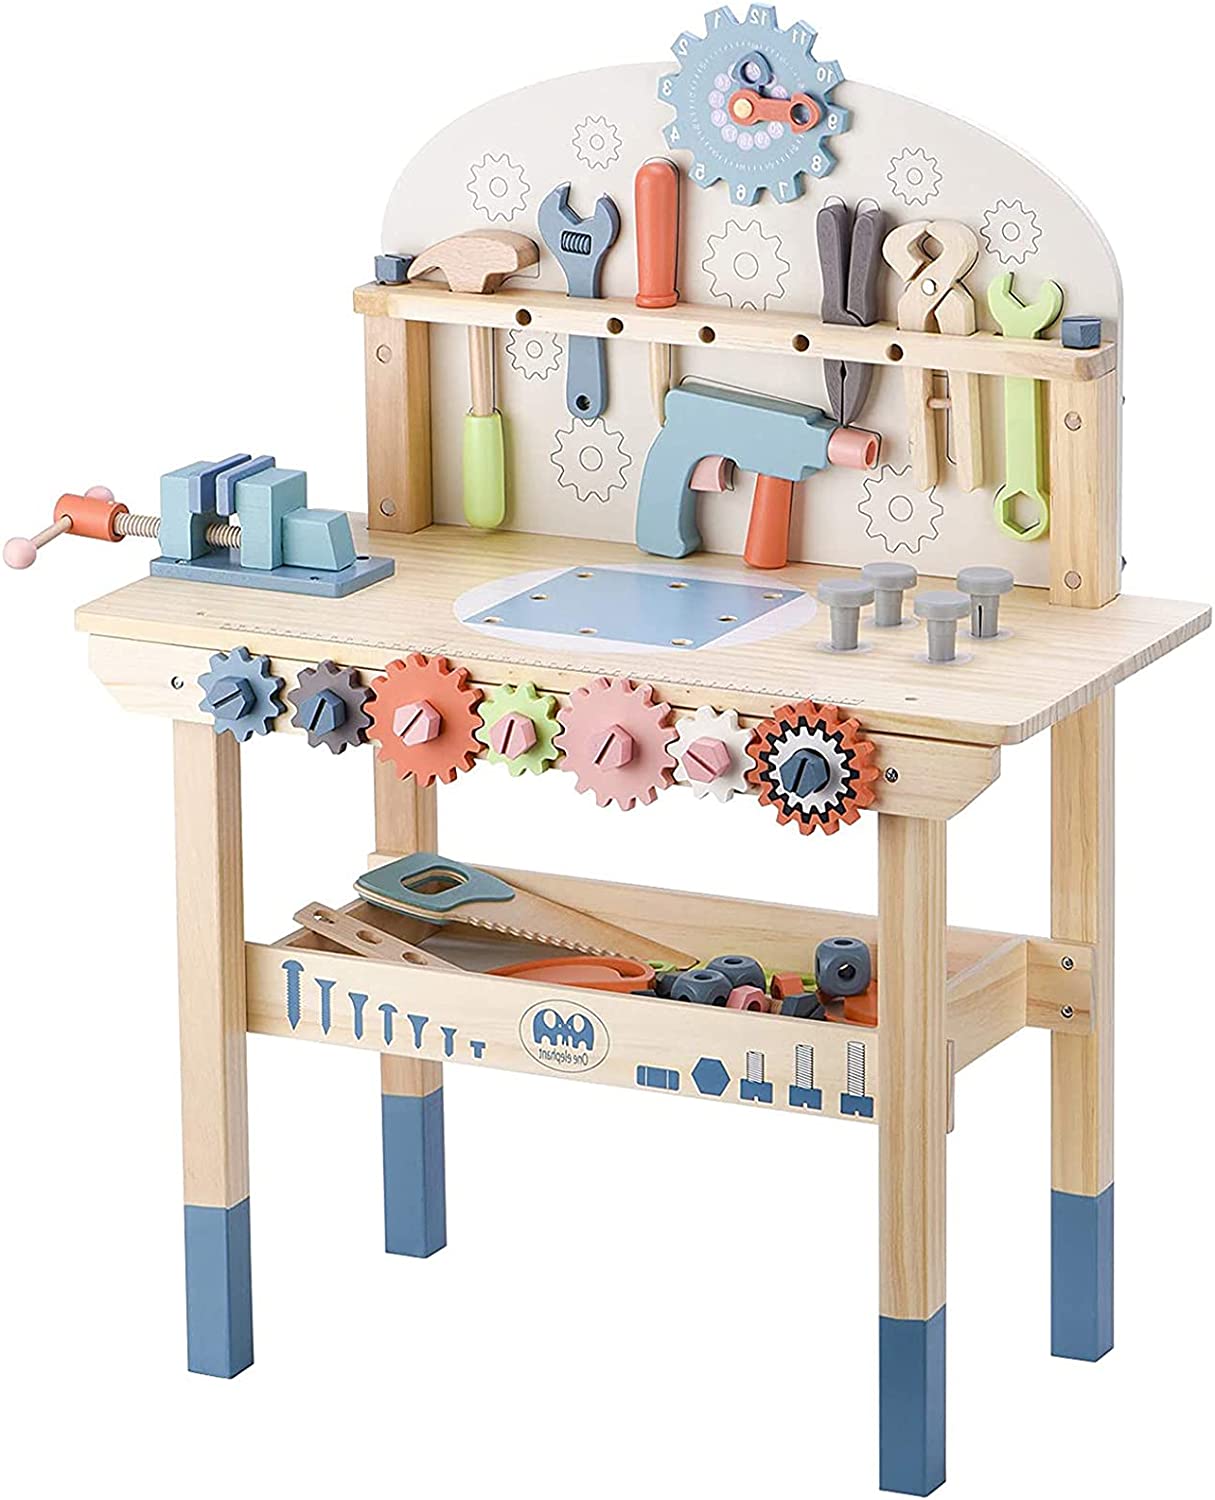 Labebe - Wooden Tool Bench for Kids Toy Play